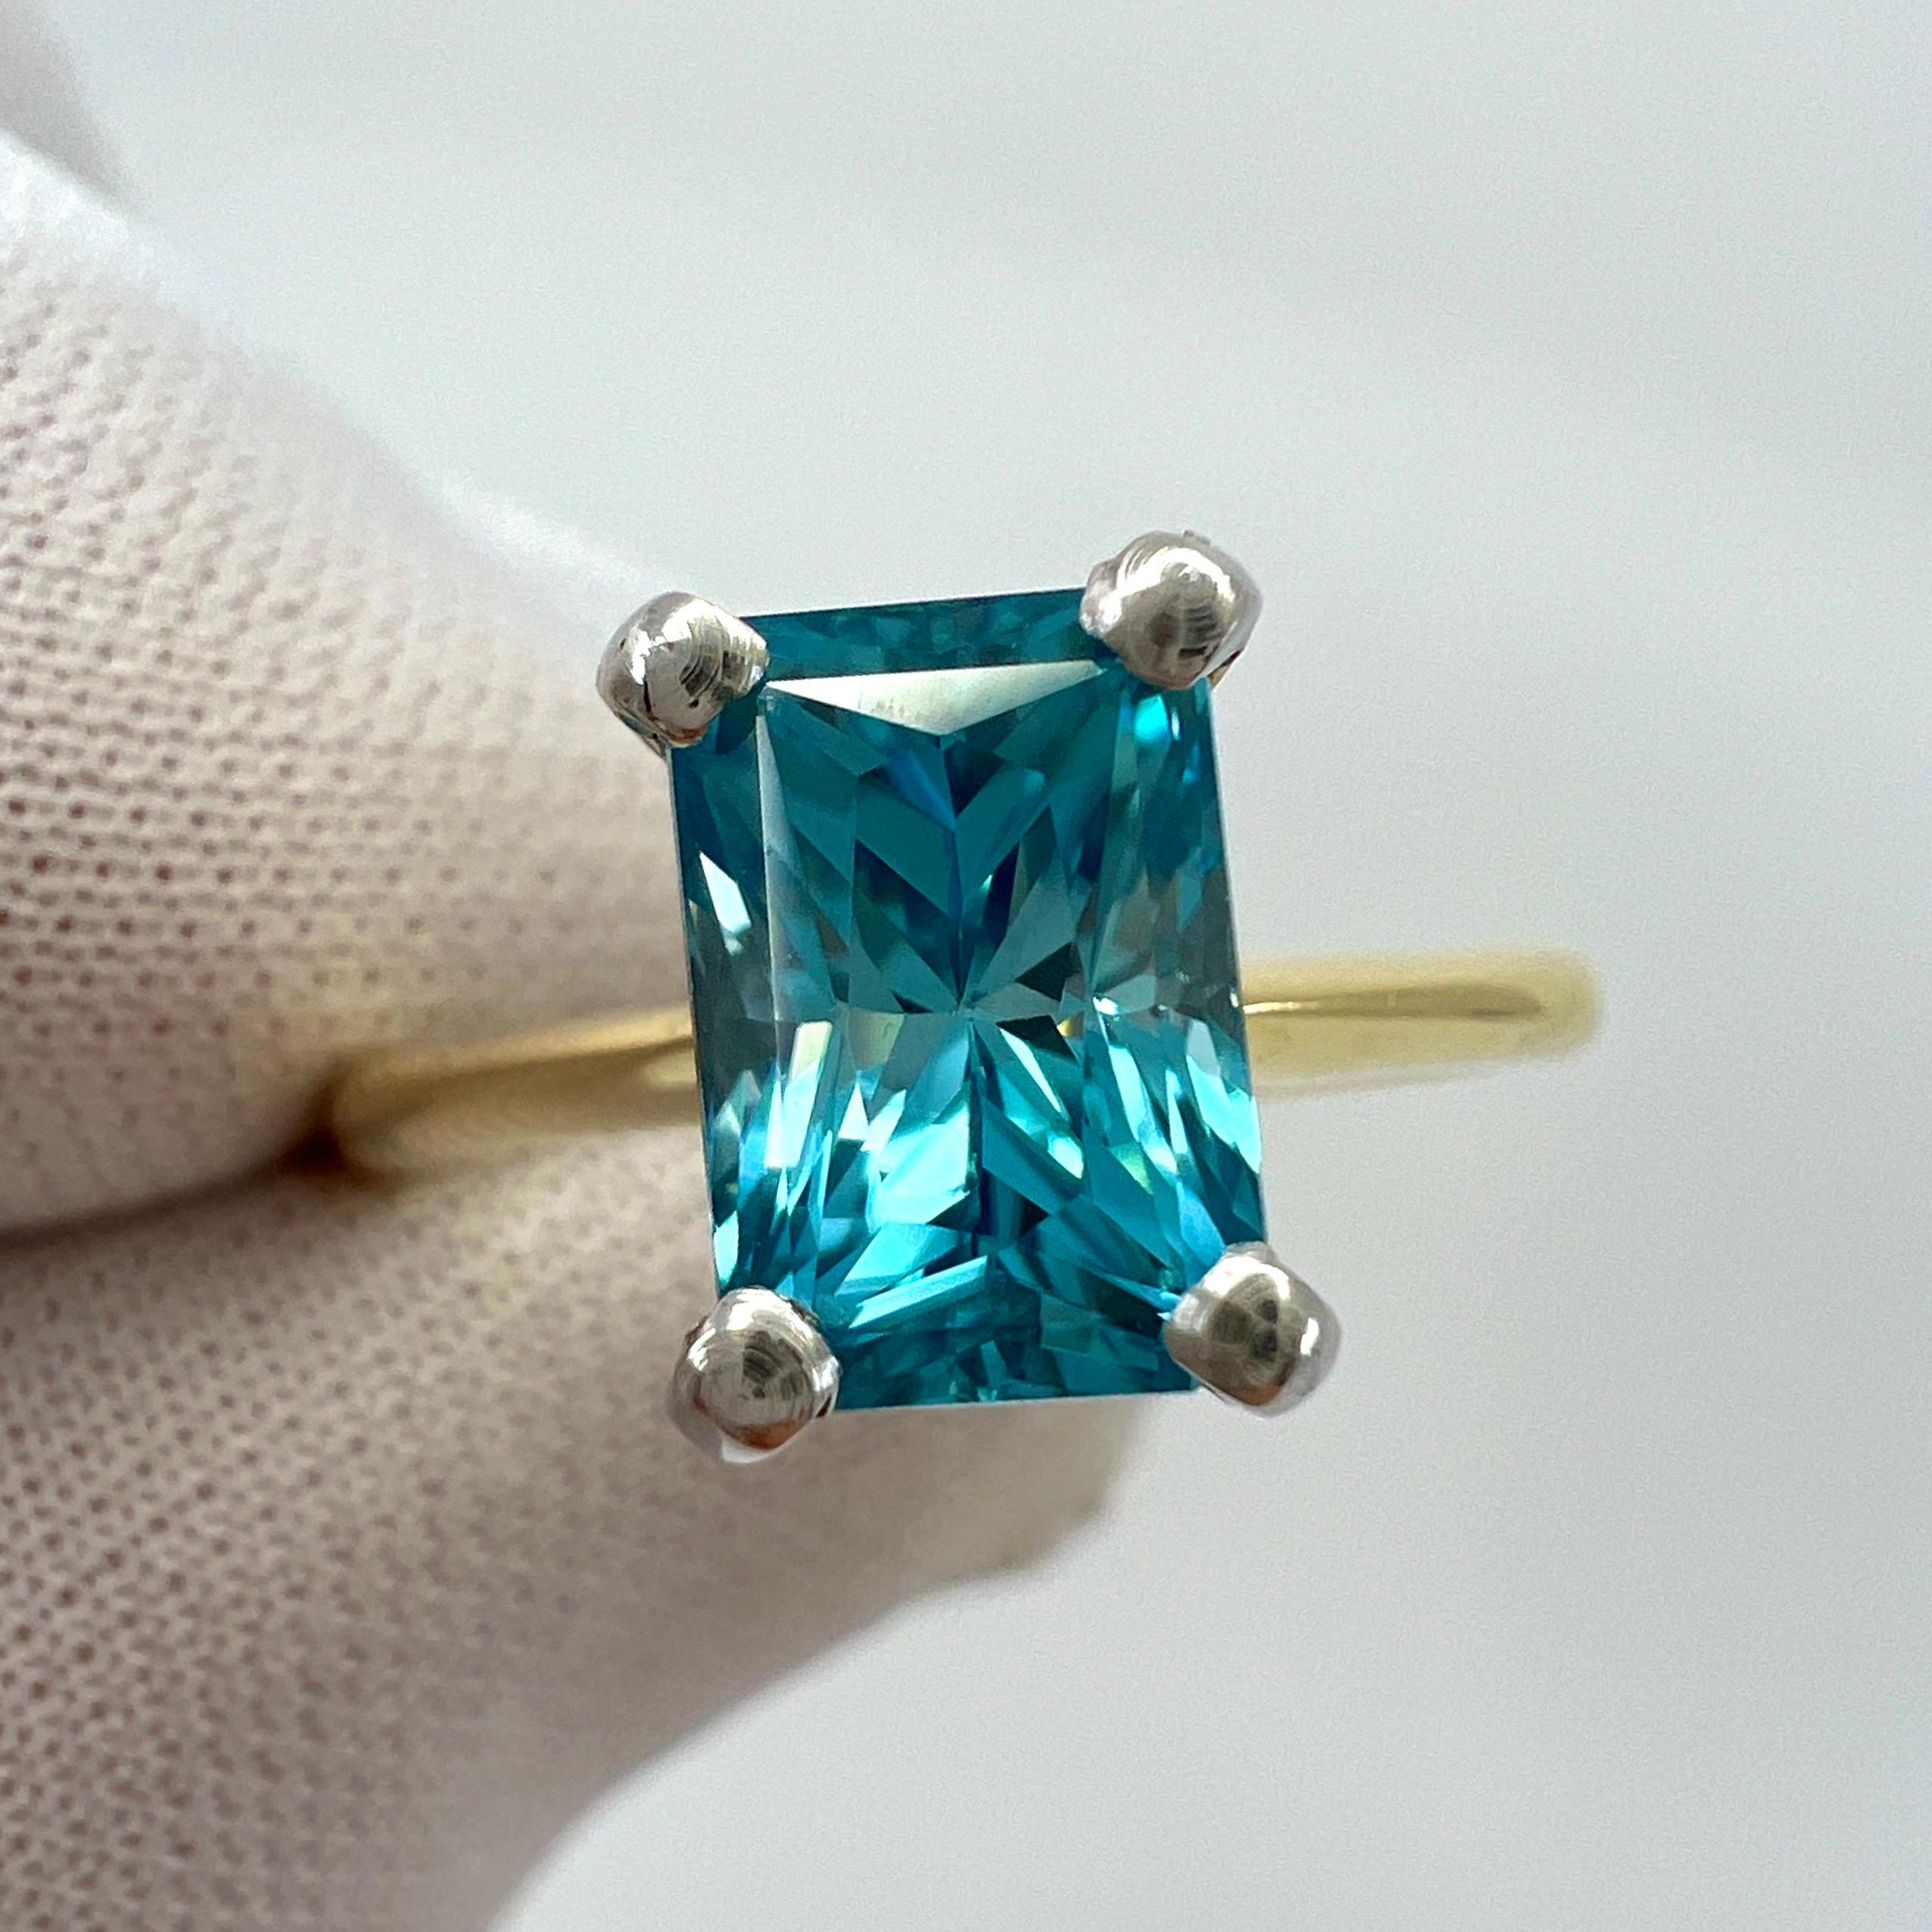 Natural Vivid Blue Zircon Fancy Cut 18k Multi Tone Gold Solitaire Ring.

2.47 Carat natural zircon with a unique fancy emerald radiant cut and stunning vivid blue colour. Measures 8x5.5mm with excellent VVS clarity. Very clean stone.

Set in a